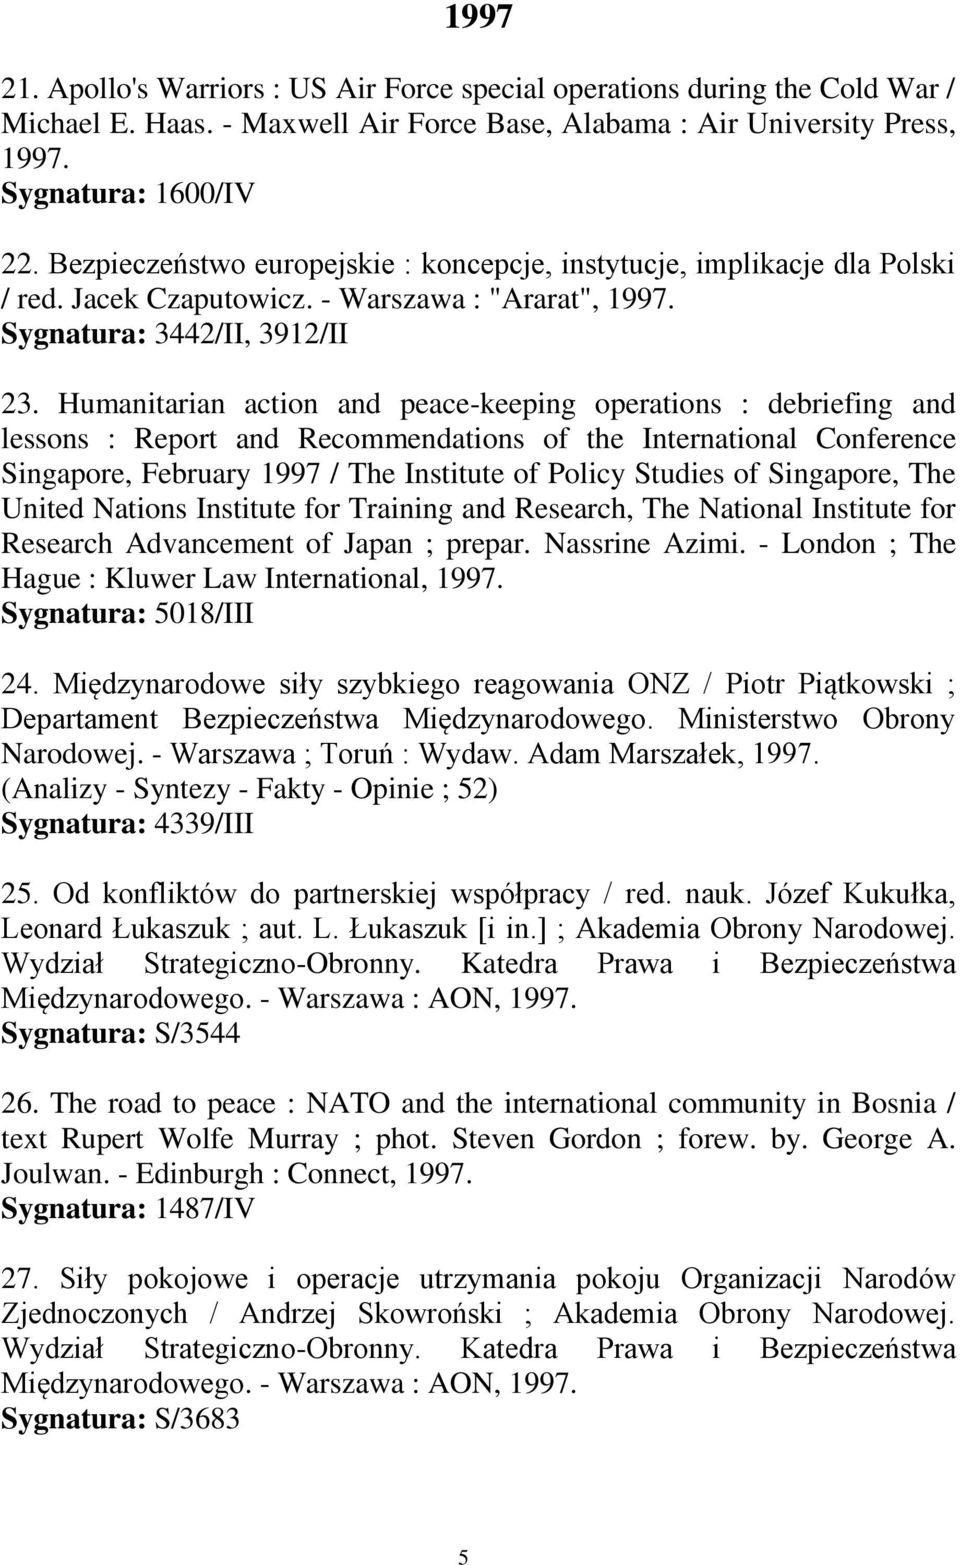 Humanitarian action and peace-keeping operations : debriefing and lessons : Report and Recommendations of the International Conference Singapore, February 1997 / The Institute of Policy Studies of